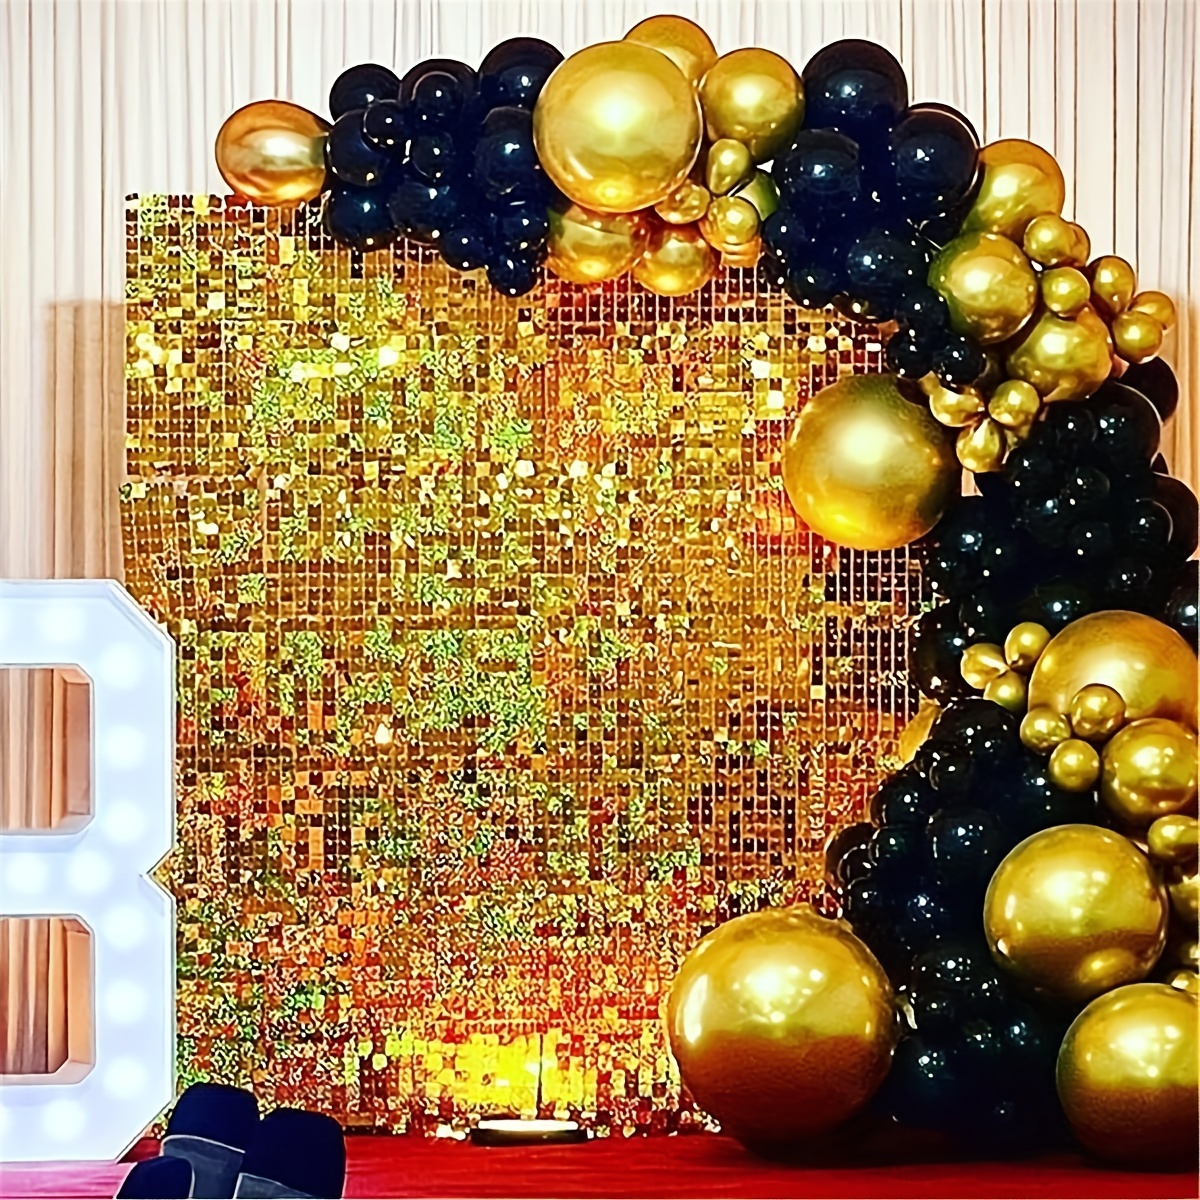  HOUSE OF PARTY Black Shimmer Wall Backdrop - 24 Pcs Square  Sequin Wall Panels Shimmer Backdrop, Wall Decor for Halloween Party  Decorations Indoor or Outdoor, Wedding & Bachelorette Party Supplies :  Electronics